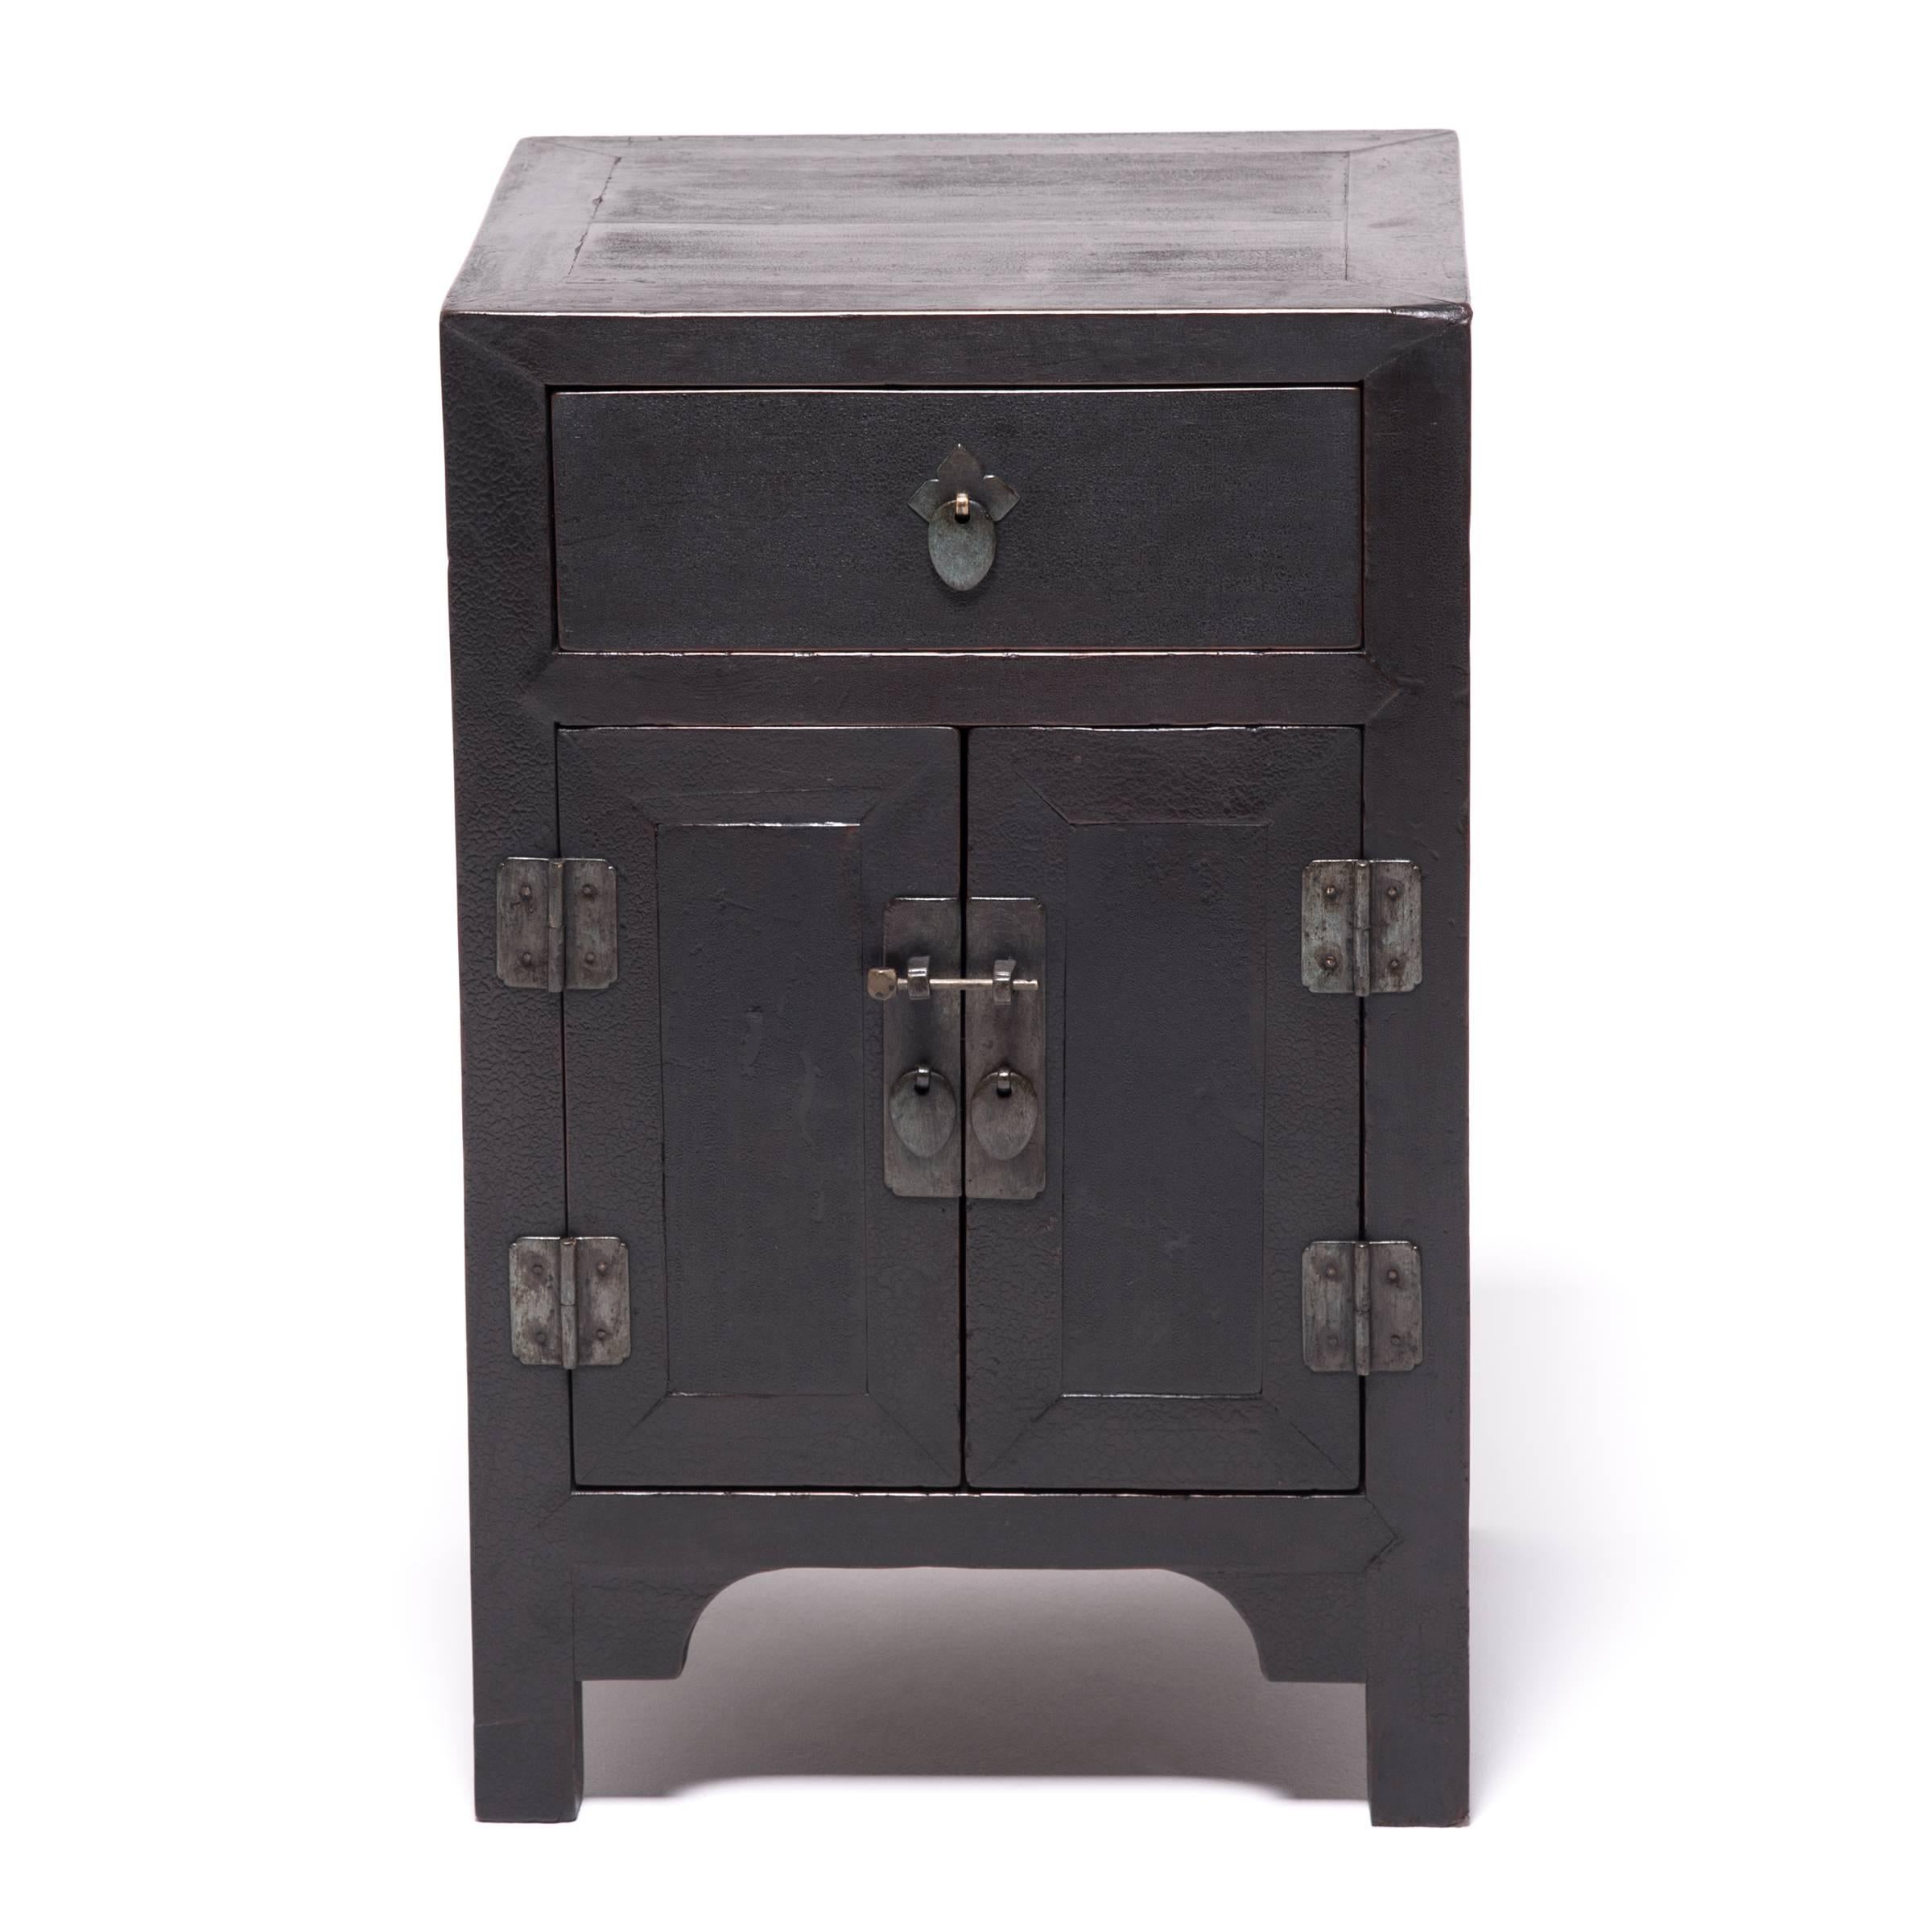 In a traditional northern Chinese home, these chests would have been placed at the side of a low, raised platform called a kang (a type of bed) and used to store household objects. Similar to today’s modular storage trend, the matching cabinets were